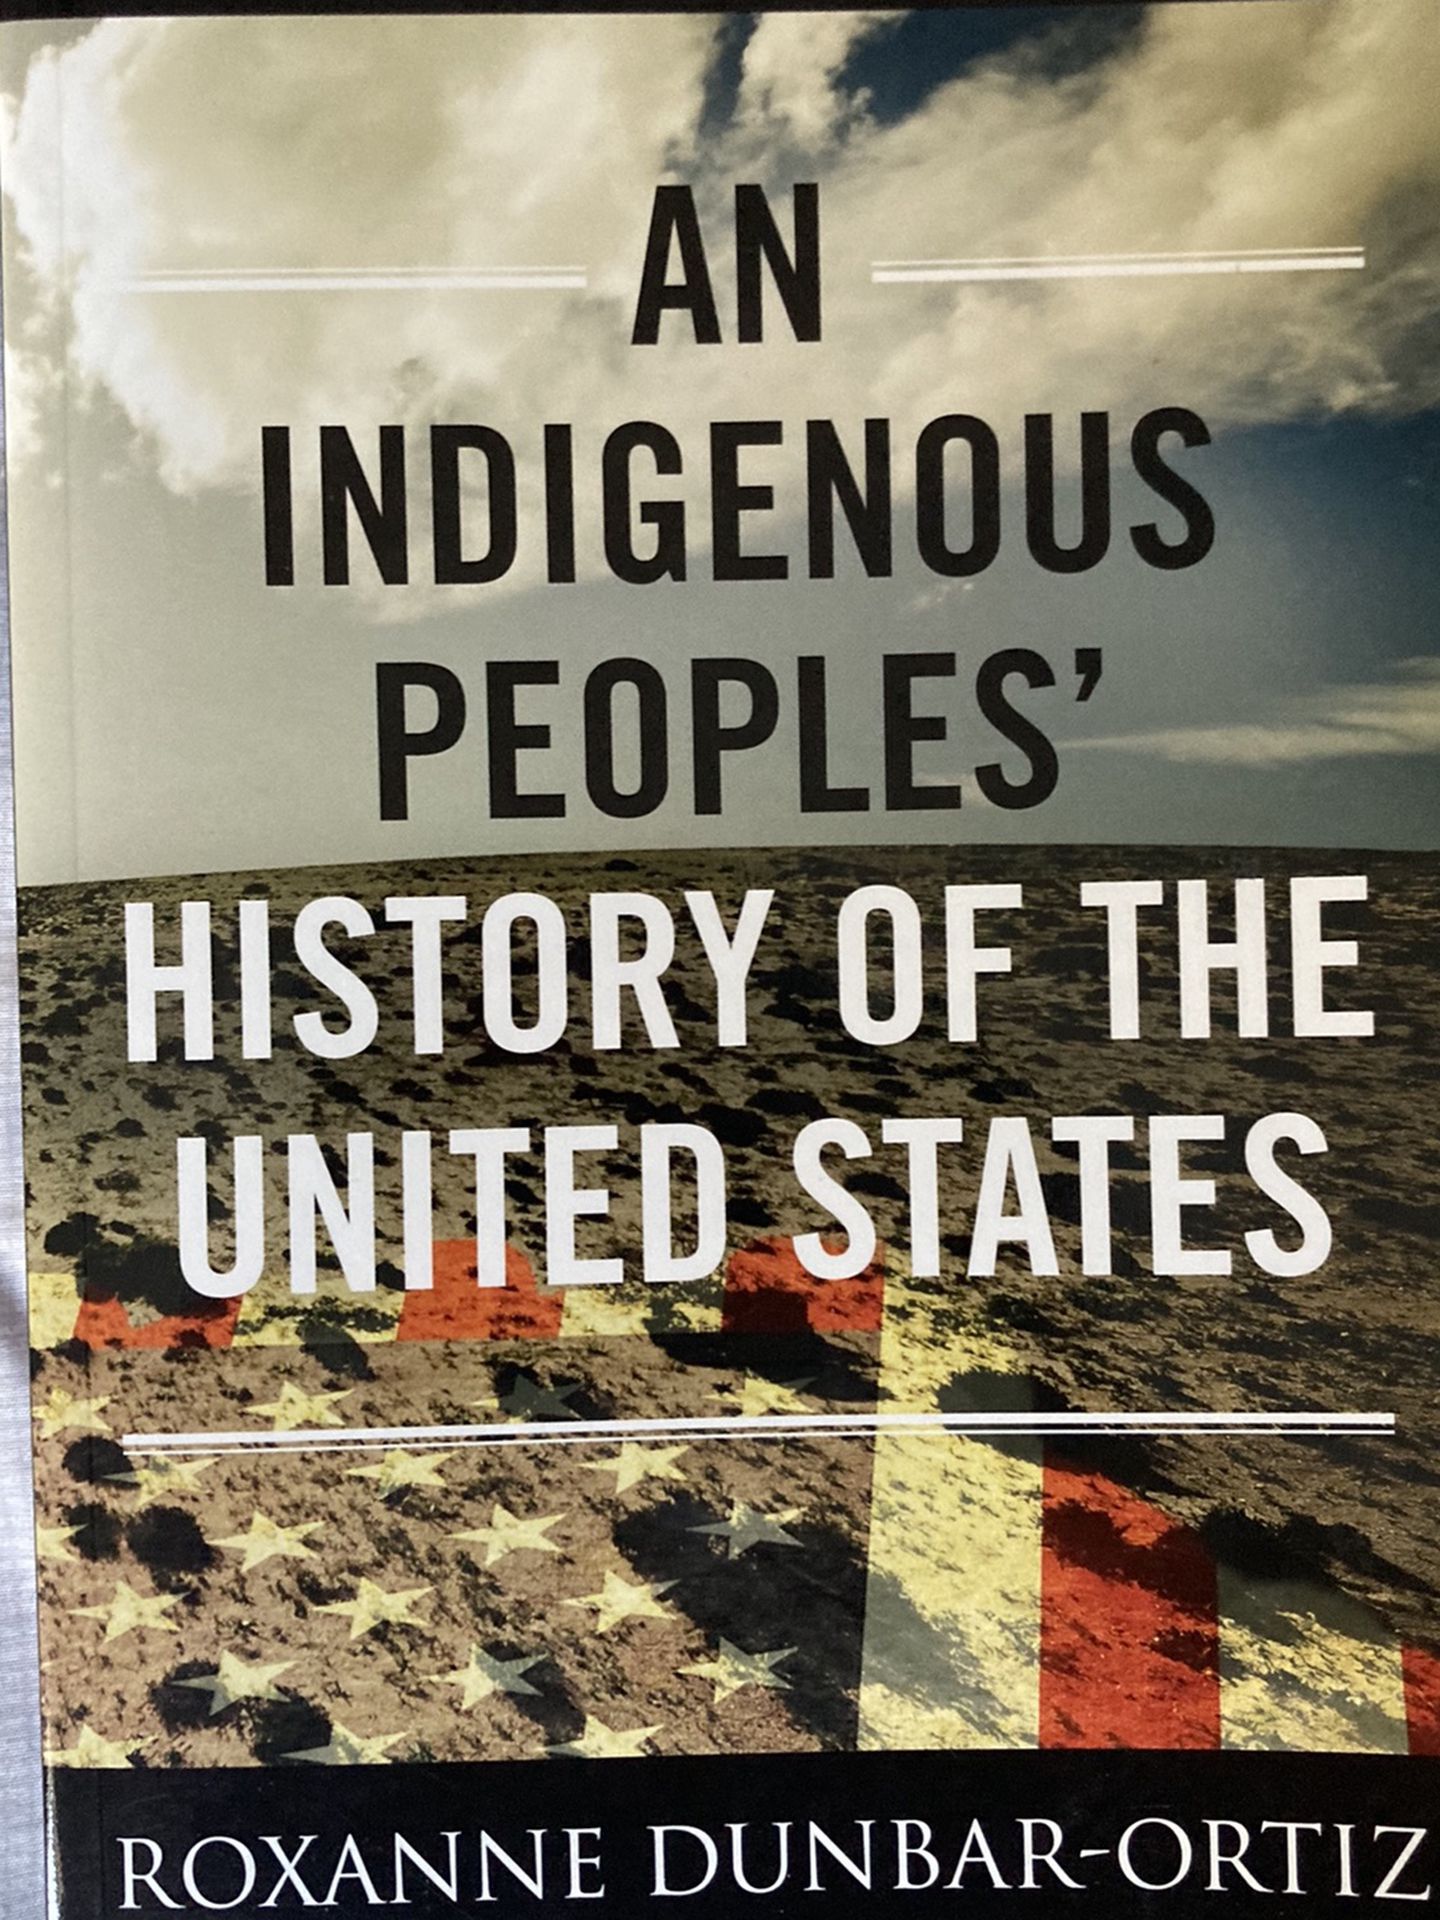 An Indigenous People’s History of the United States